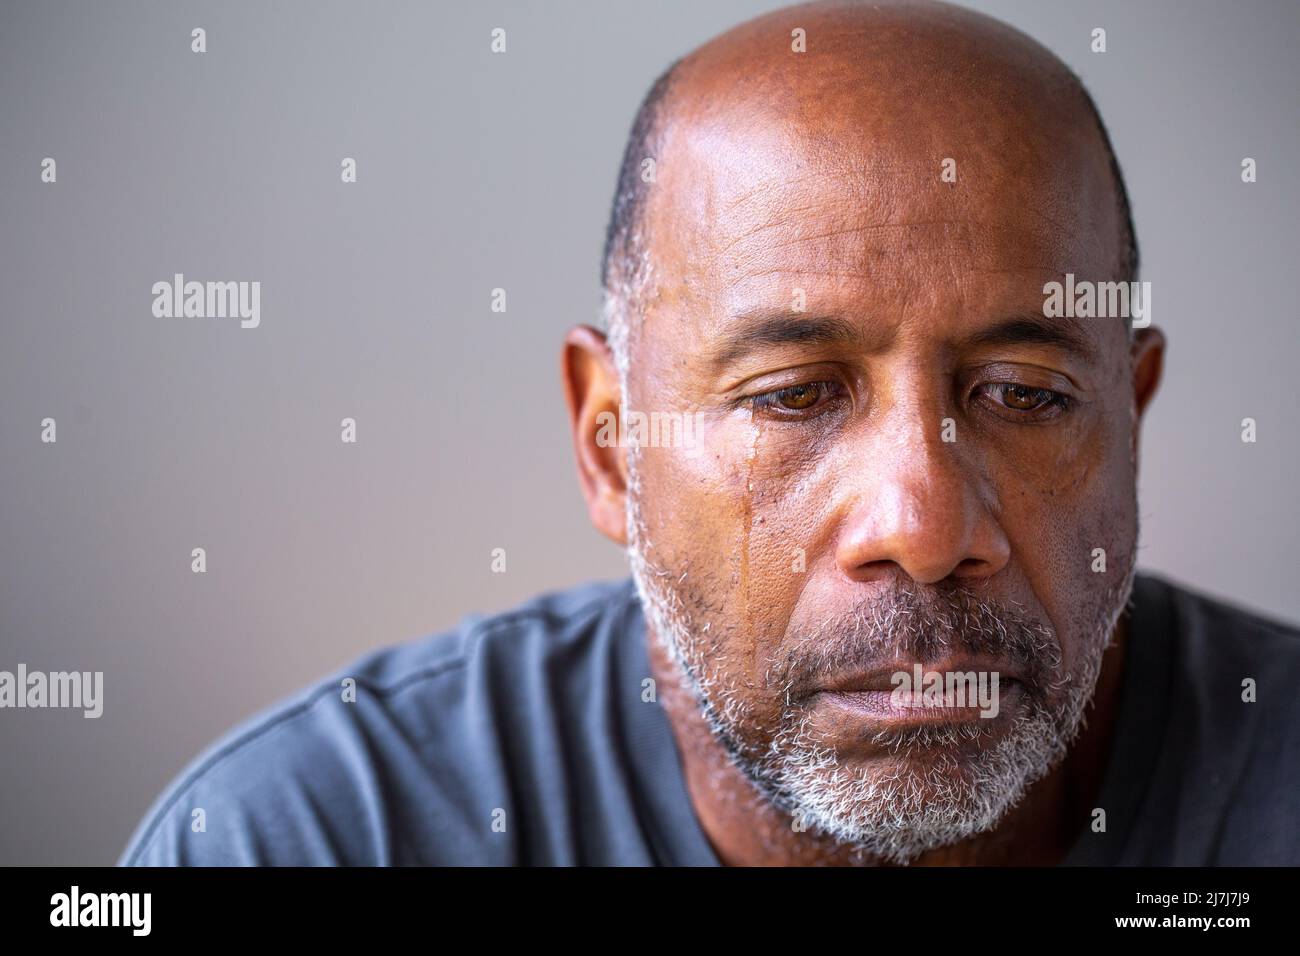 Portrait of a mature man looking sad with tears in his eyes. Stock Photo